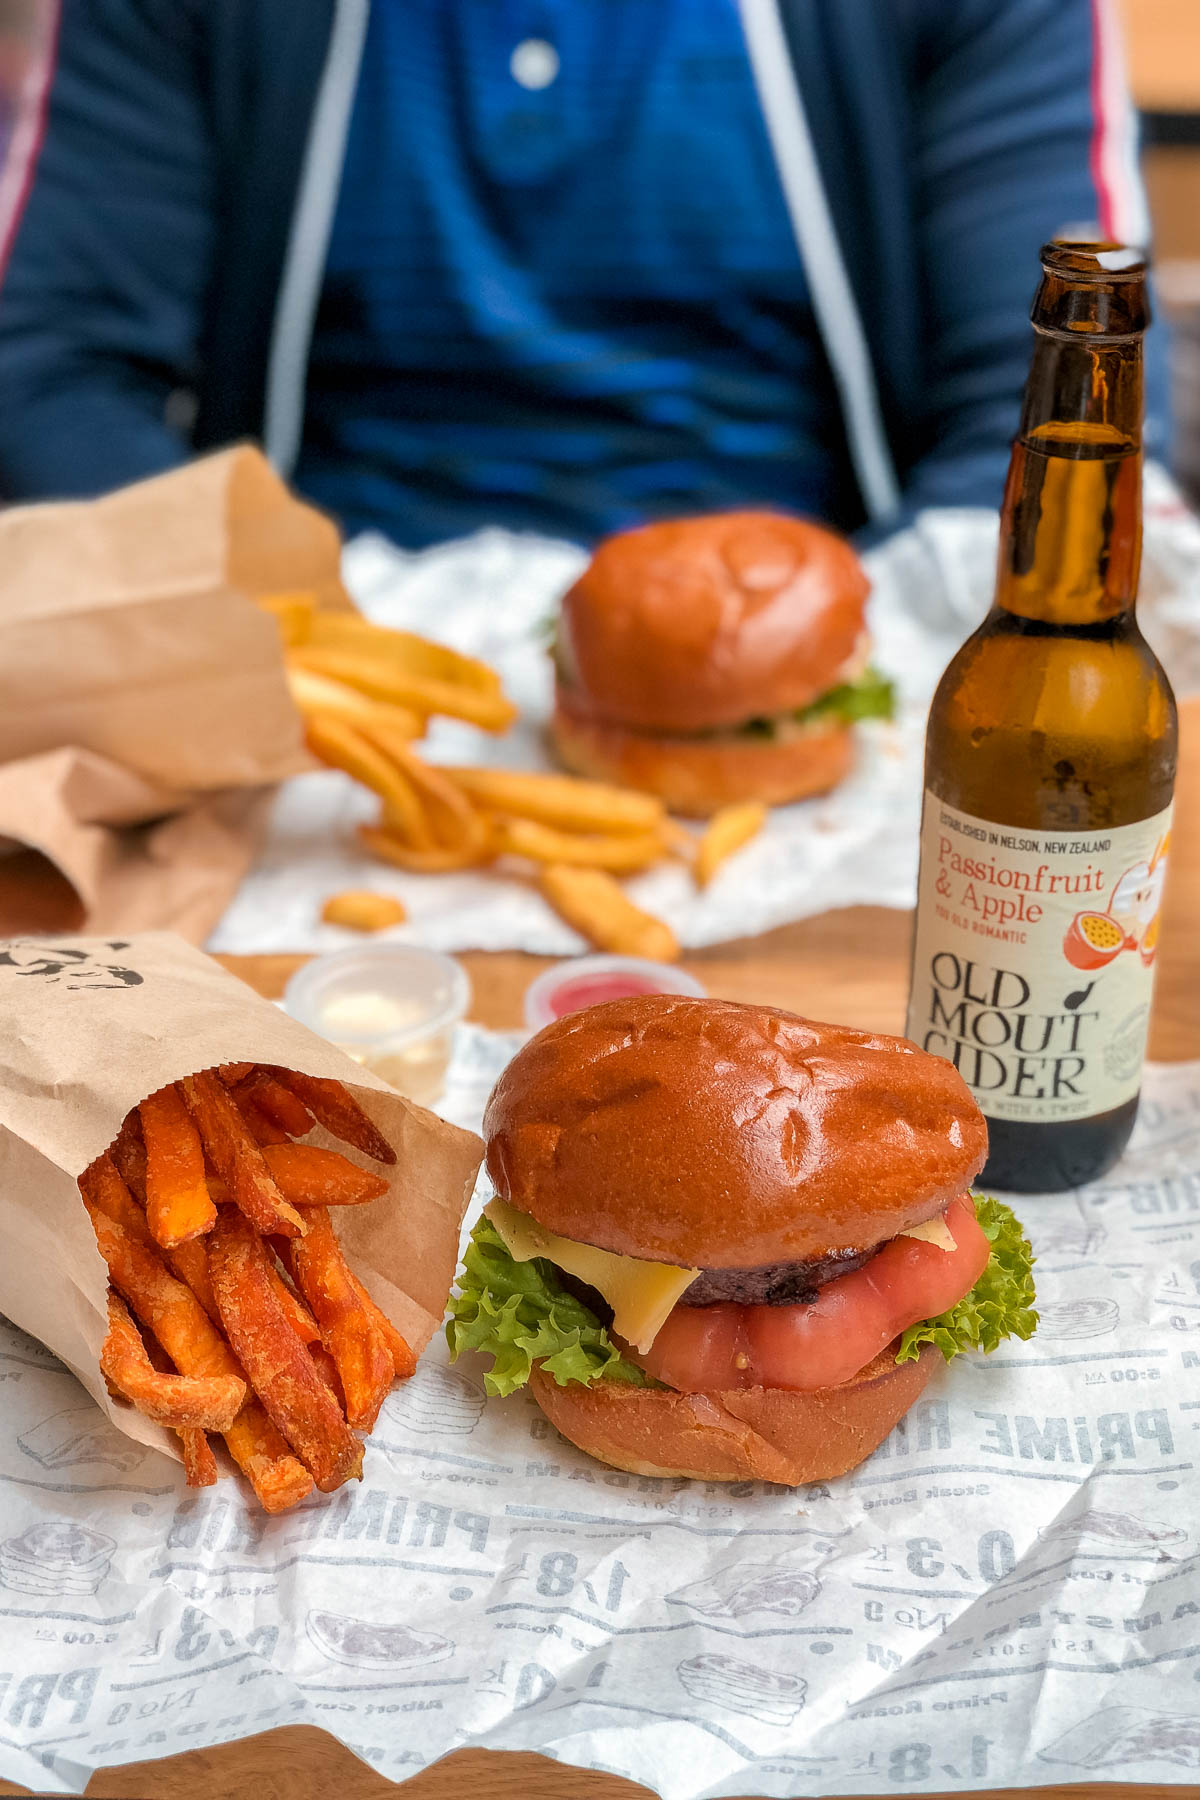 Burgers and fries at Foodhallen Amsterdam